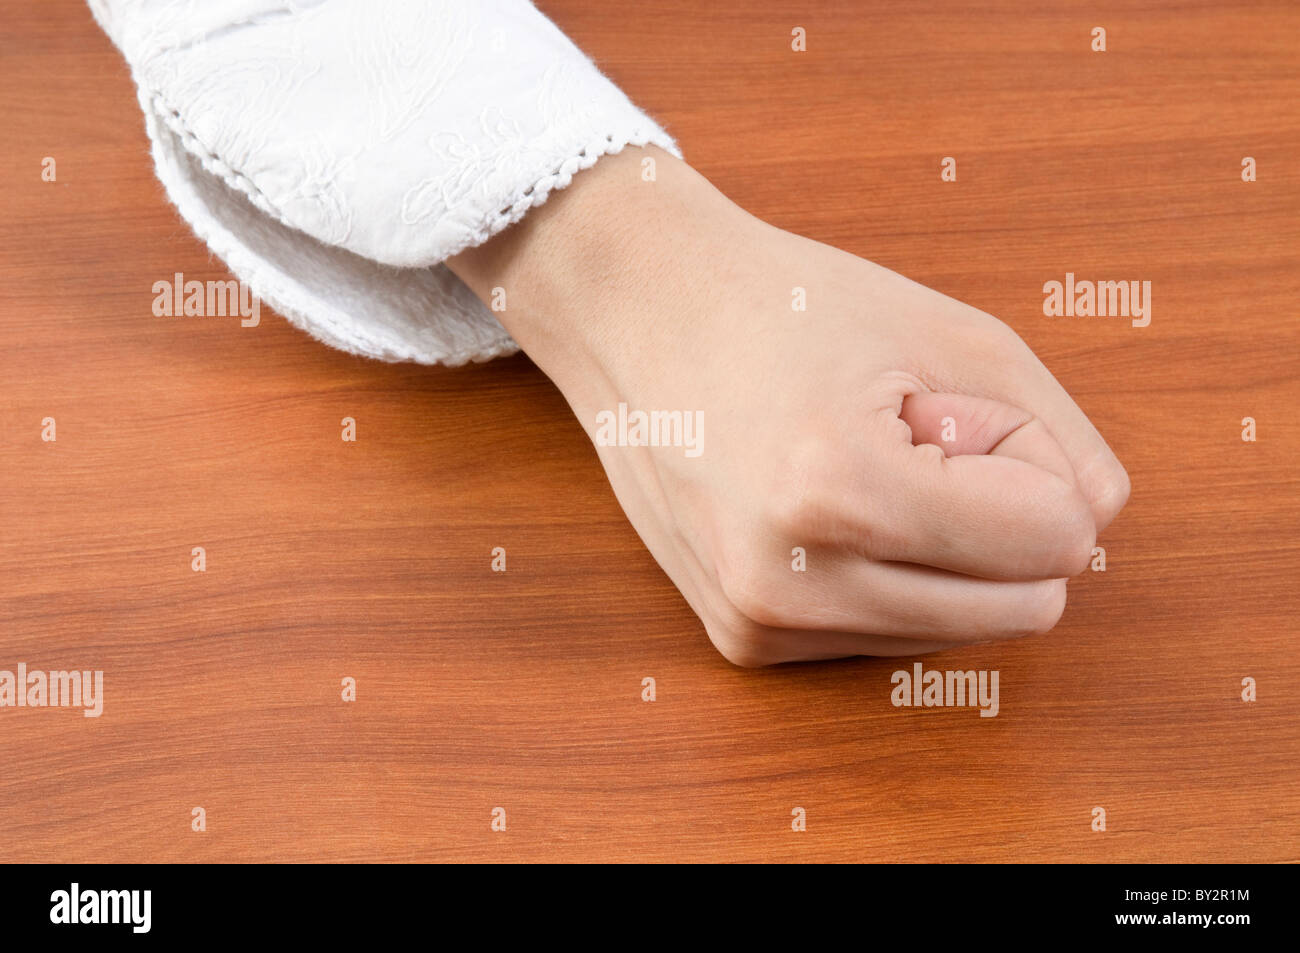 A woman banging her fist. Stock Photo